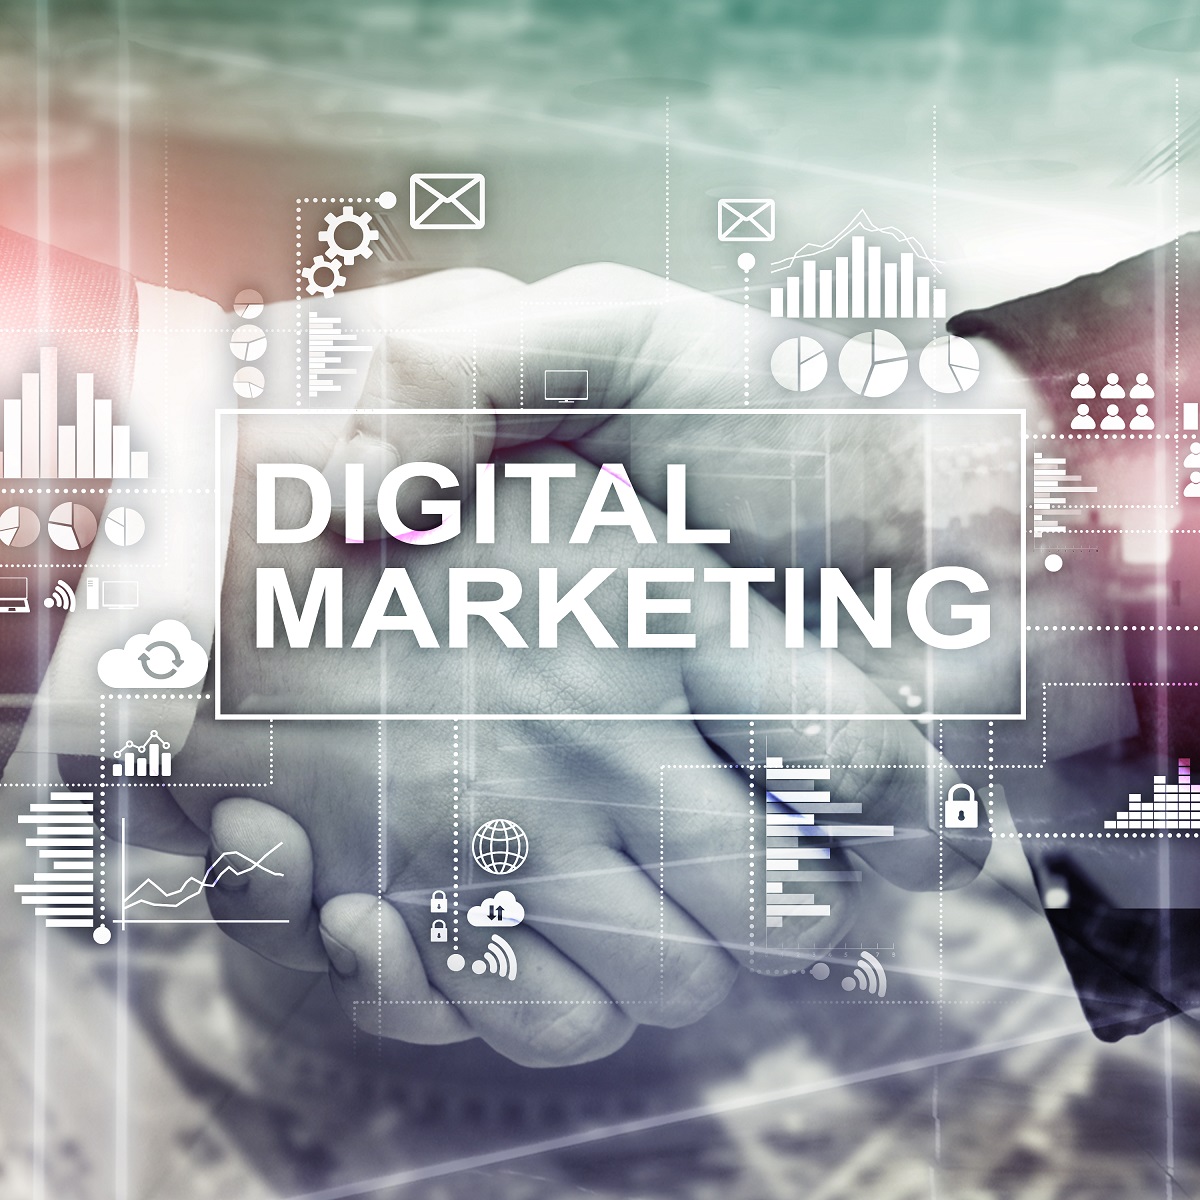 How can Real Estate Business owners upscale their business with Digital Marketing? 